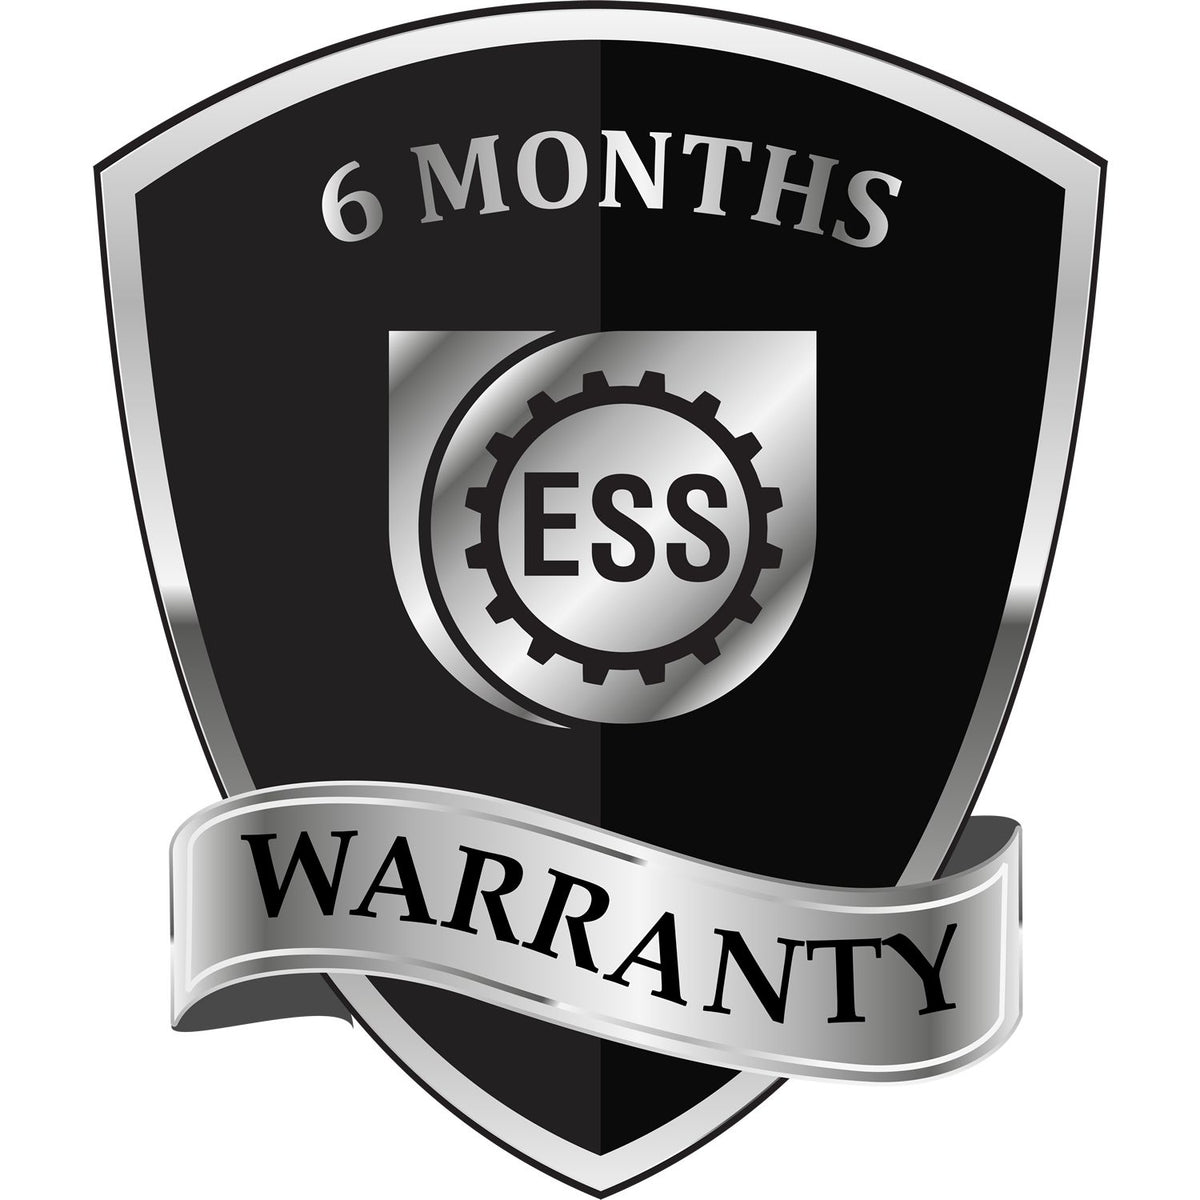 A badge or emblem showing a warranty icon for the Slim Pre-Inked Utah Professional Engineer Seal Stamp